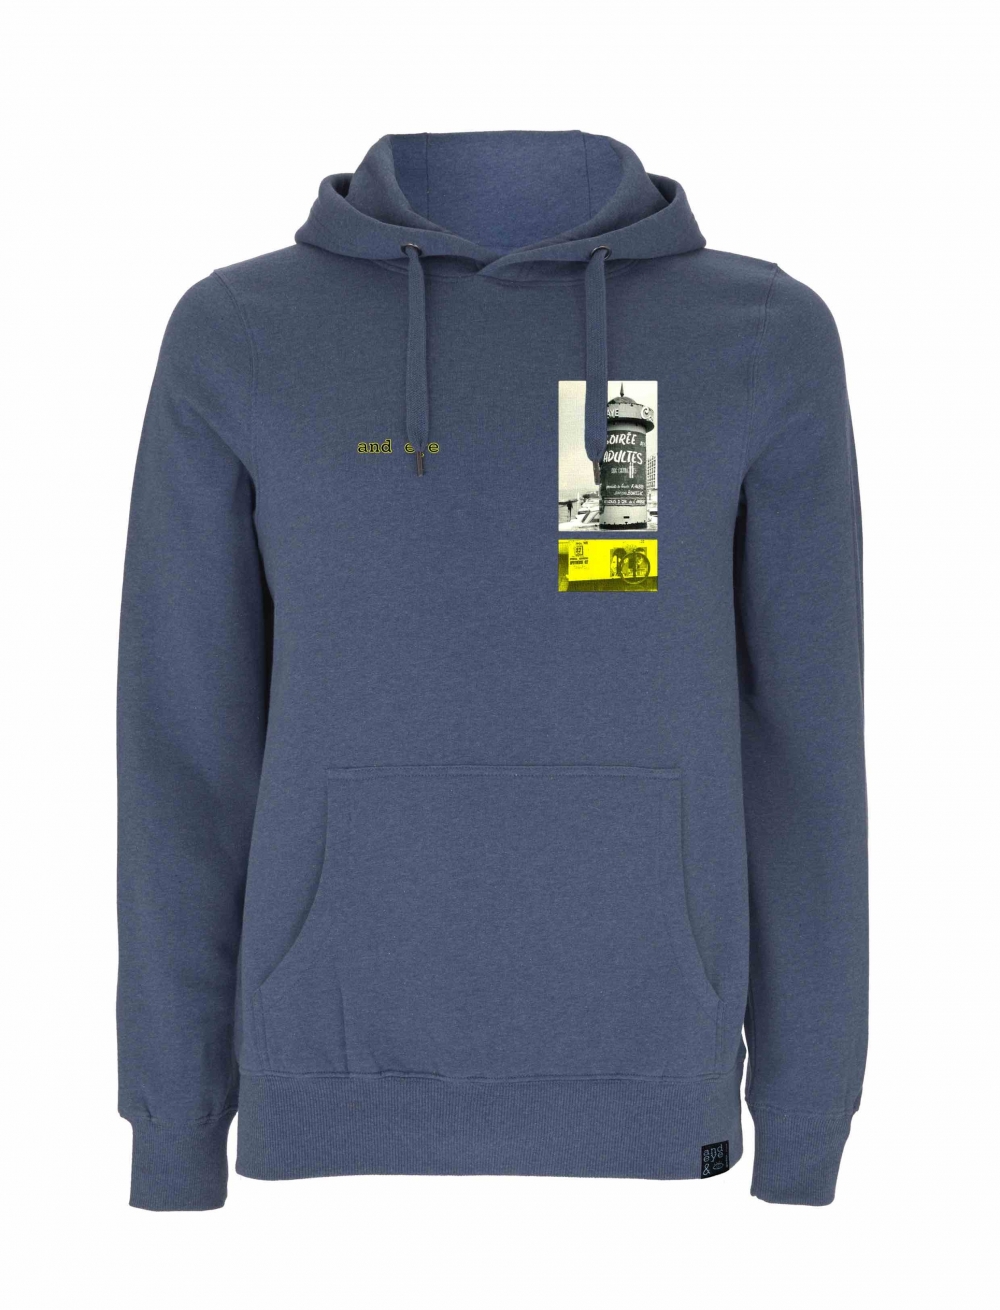 Pullover hoody with a vintage image of Hendaye